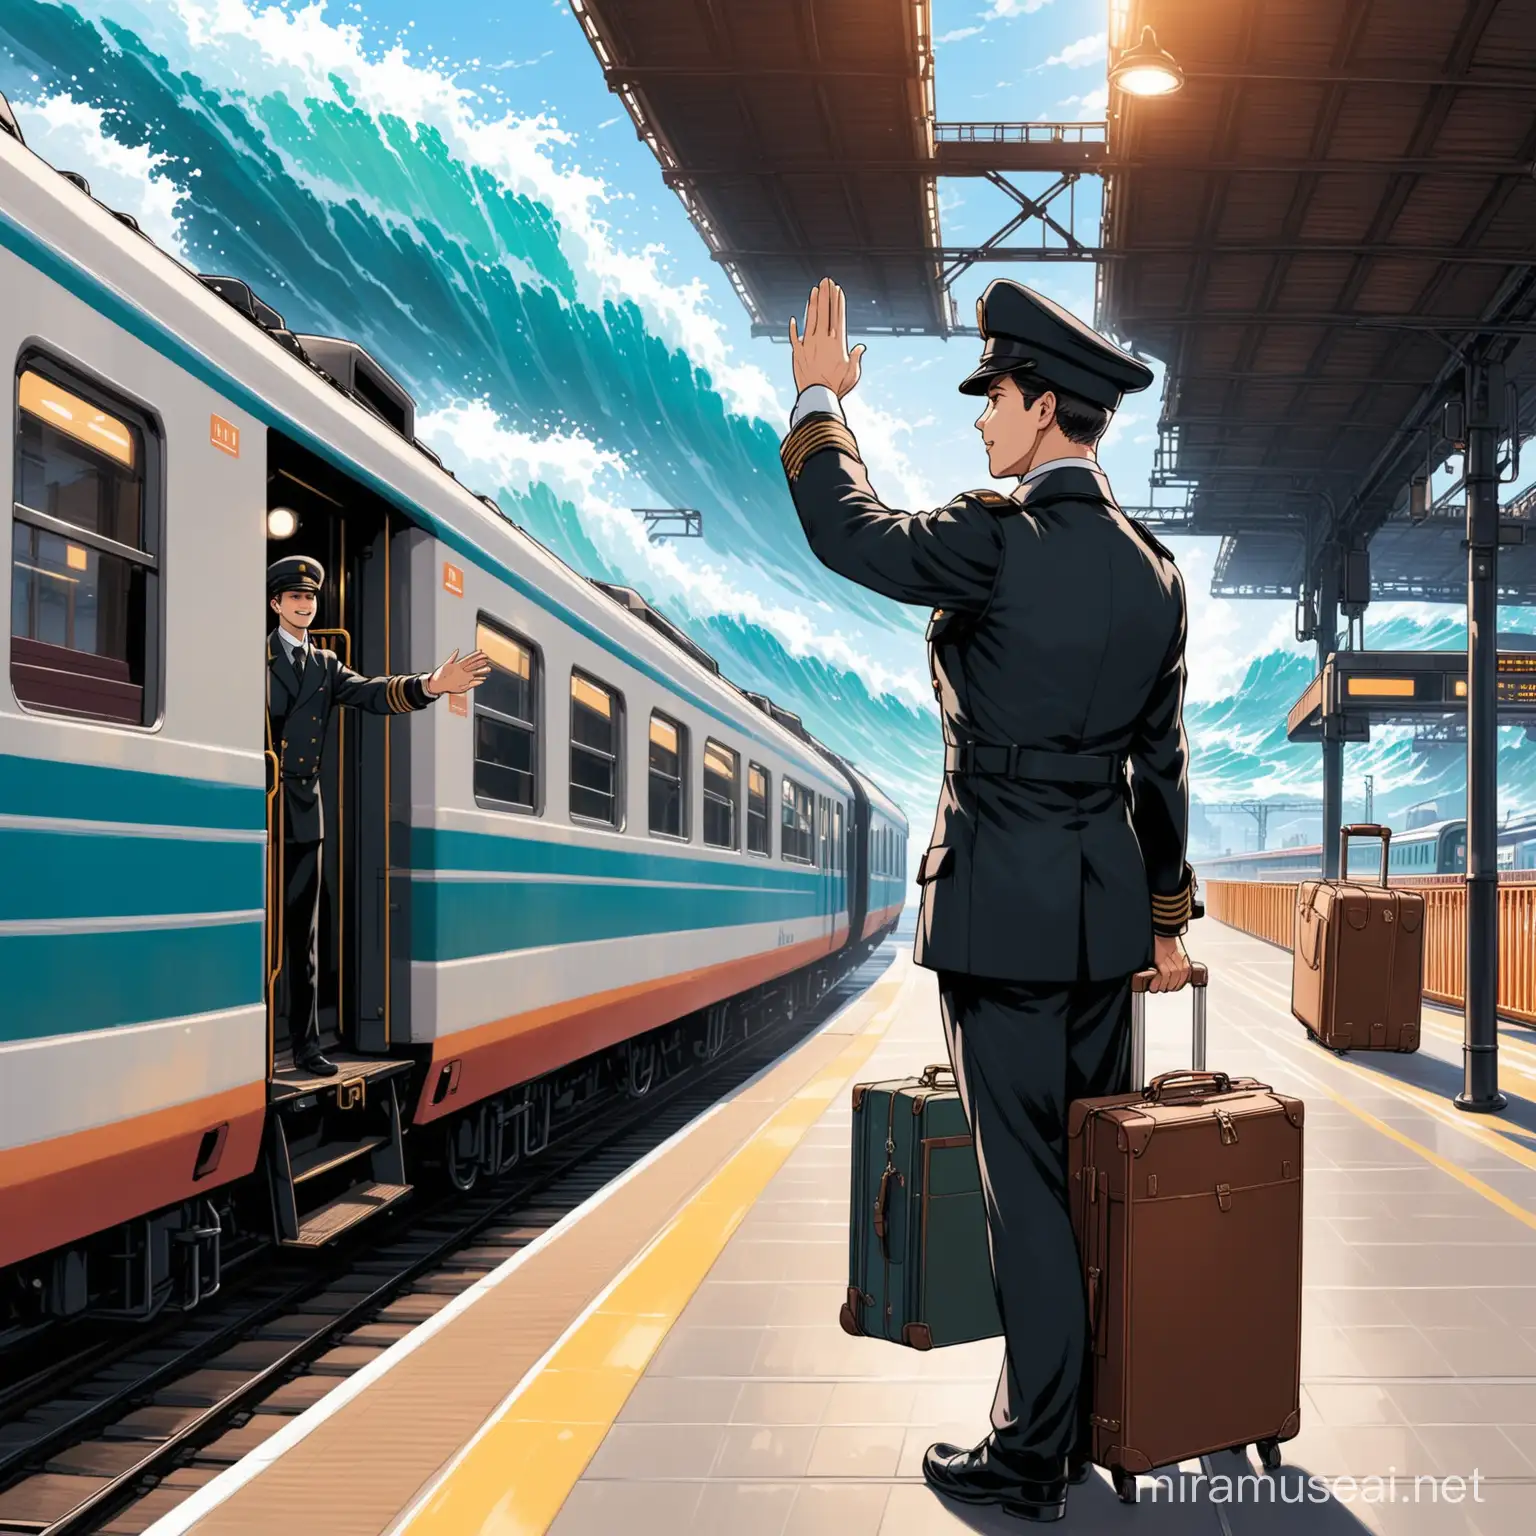 Conductueur in front of an train on a perron and waves to a passenger with a suitcase